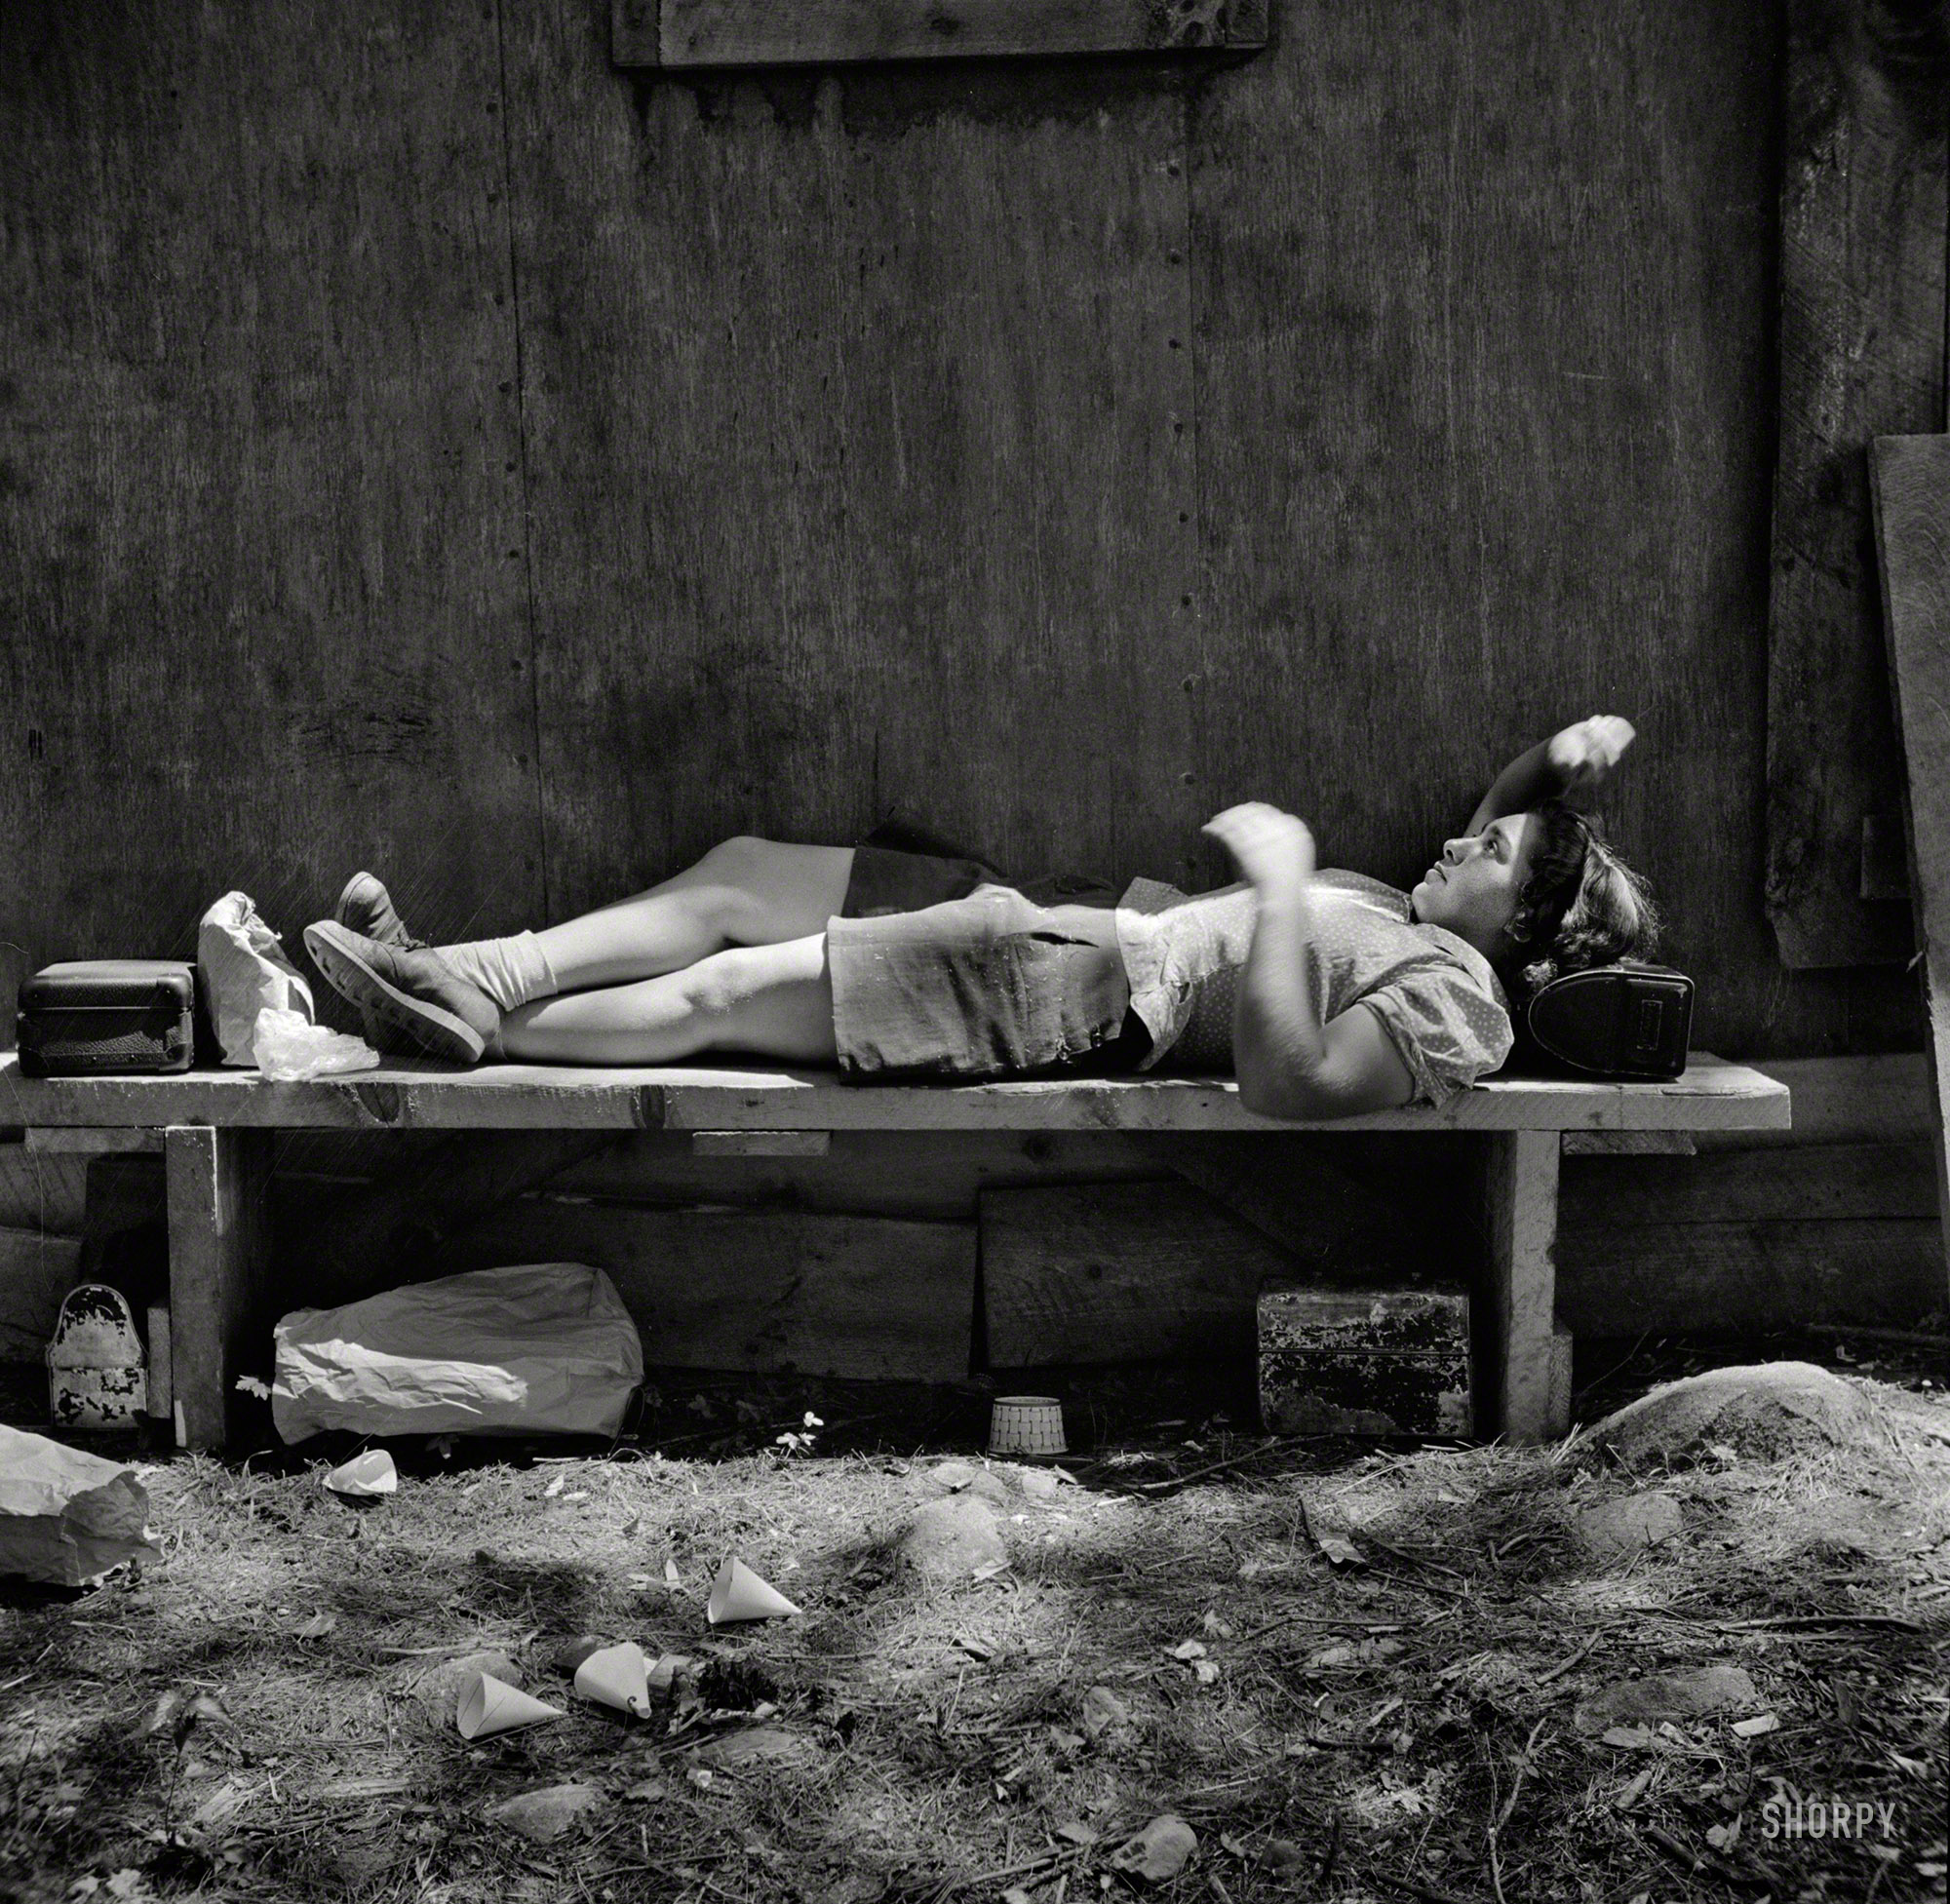 June 1943. "Turkey Pond, near Concord, New Hampshire. Women workers employed by a Department of Agriculture timber salvage sawmill. Ruth De Roche, 18-year-old 'pit woman,' resting her head on her lunch pail during the lunch hour." Photo by John Collier for the Office of War Information. View full size.